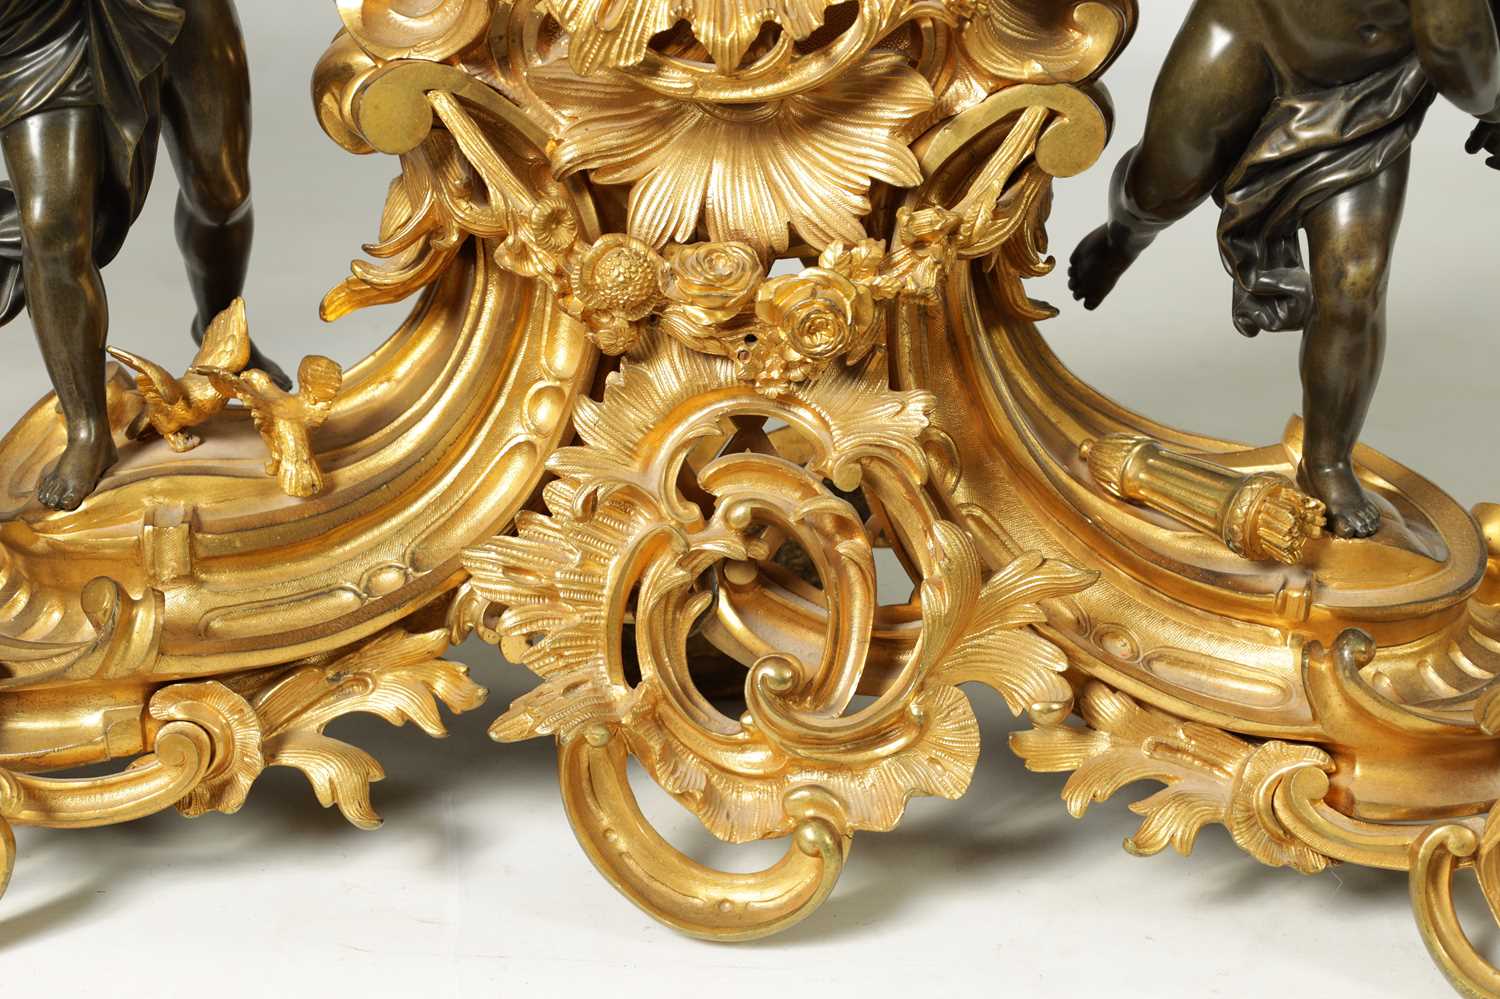 A LARGE LATE 19TH CENTURY FRENCH ORMOLU AND PATINATED BRONZE CLOCK GARNITURE - Image 7 of 10